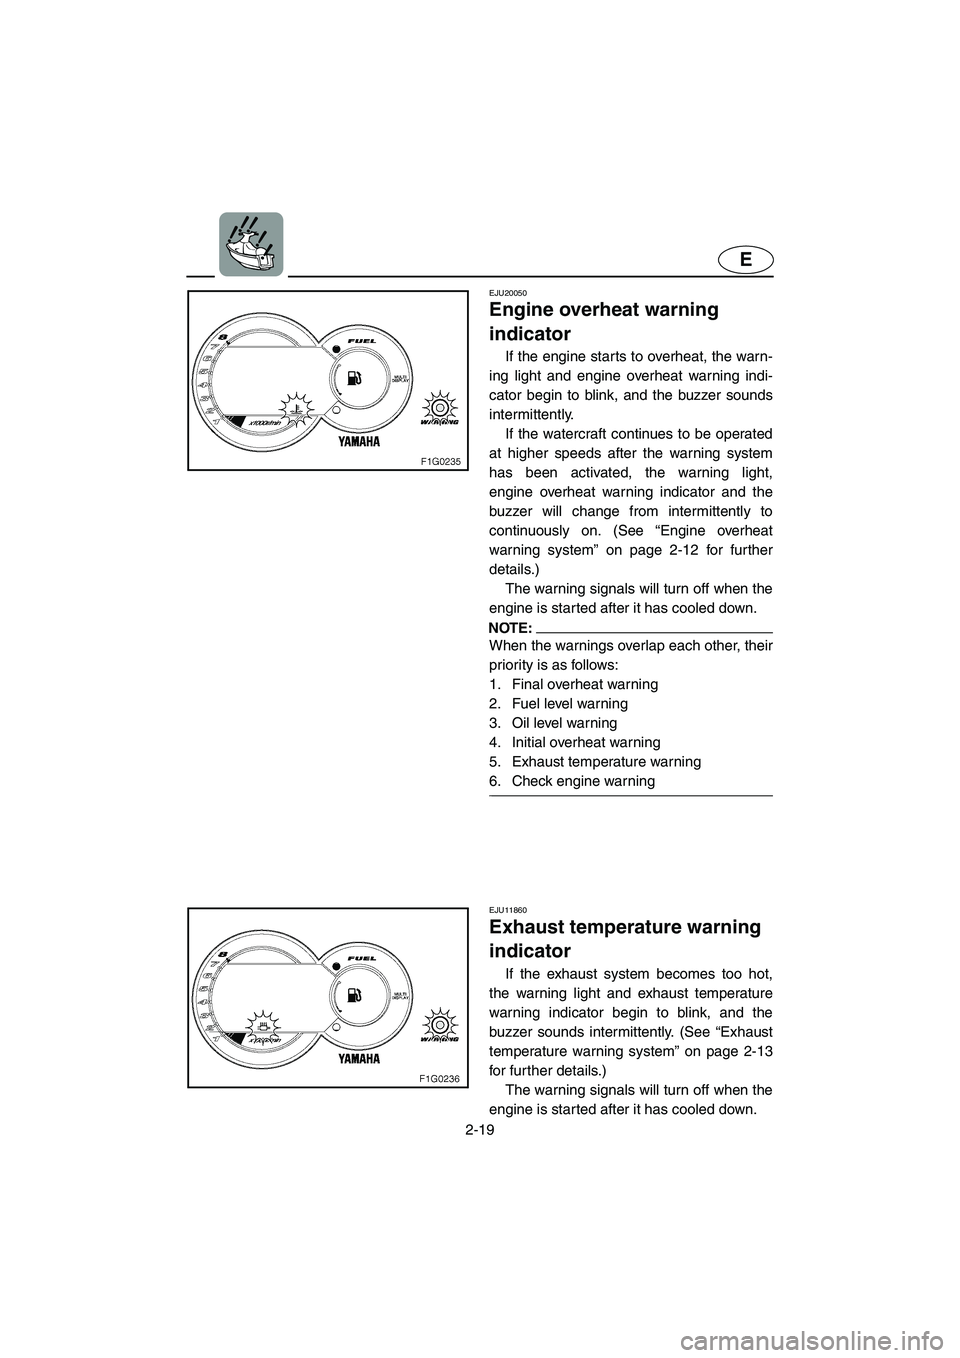 YAMAHA GP1300R 2005  Owners Manual 2-19
E
EJU20050
Engine overheat warning 
indicator 
If the engine starts to overheat, the warn-
ing light and engine overheat warning indi-
cator begin to blink, and the buzzer sounds
intermittently. 